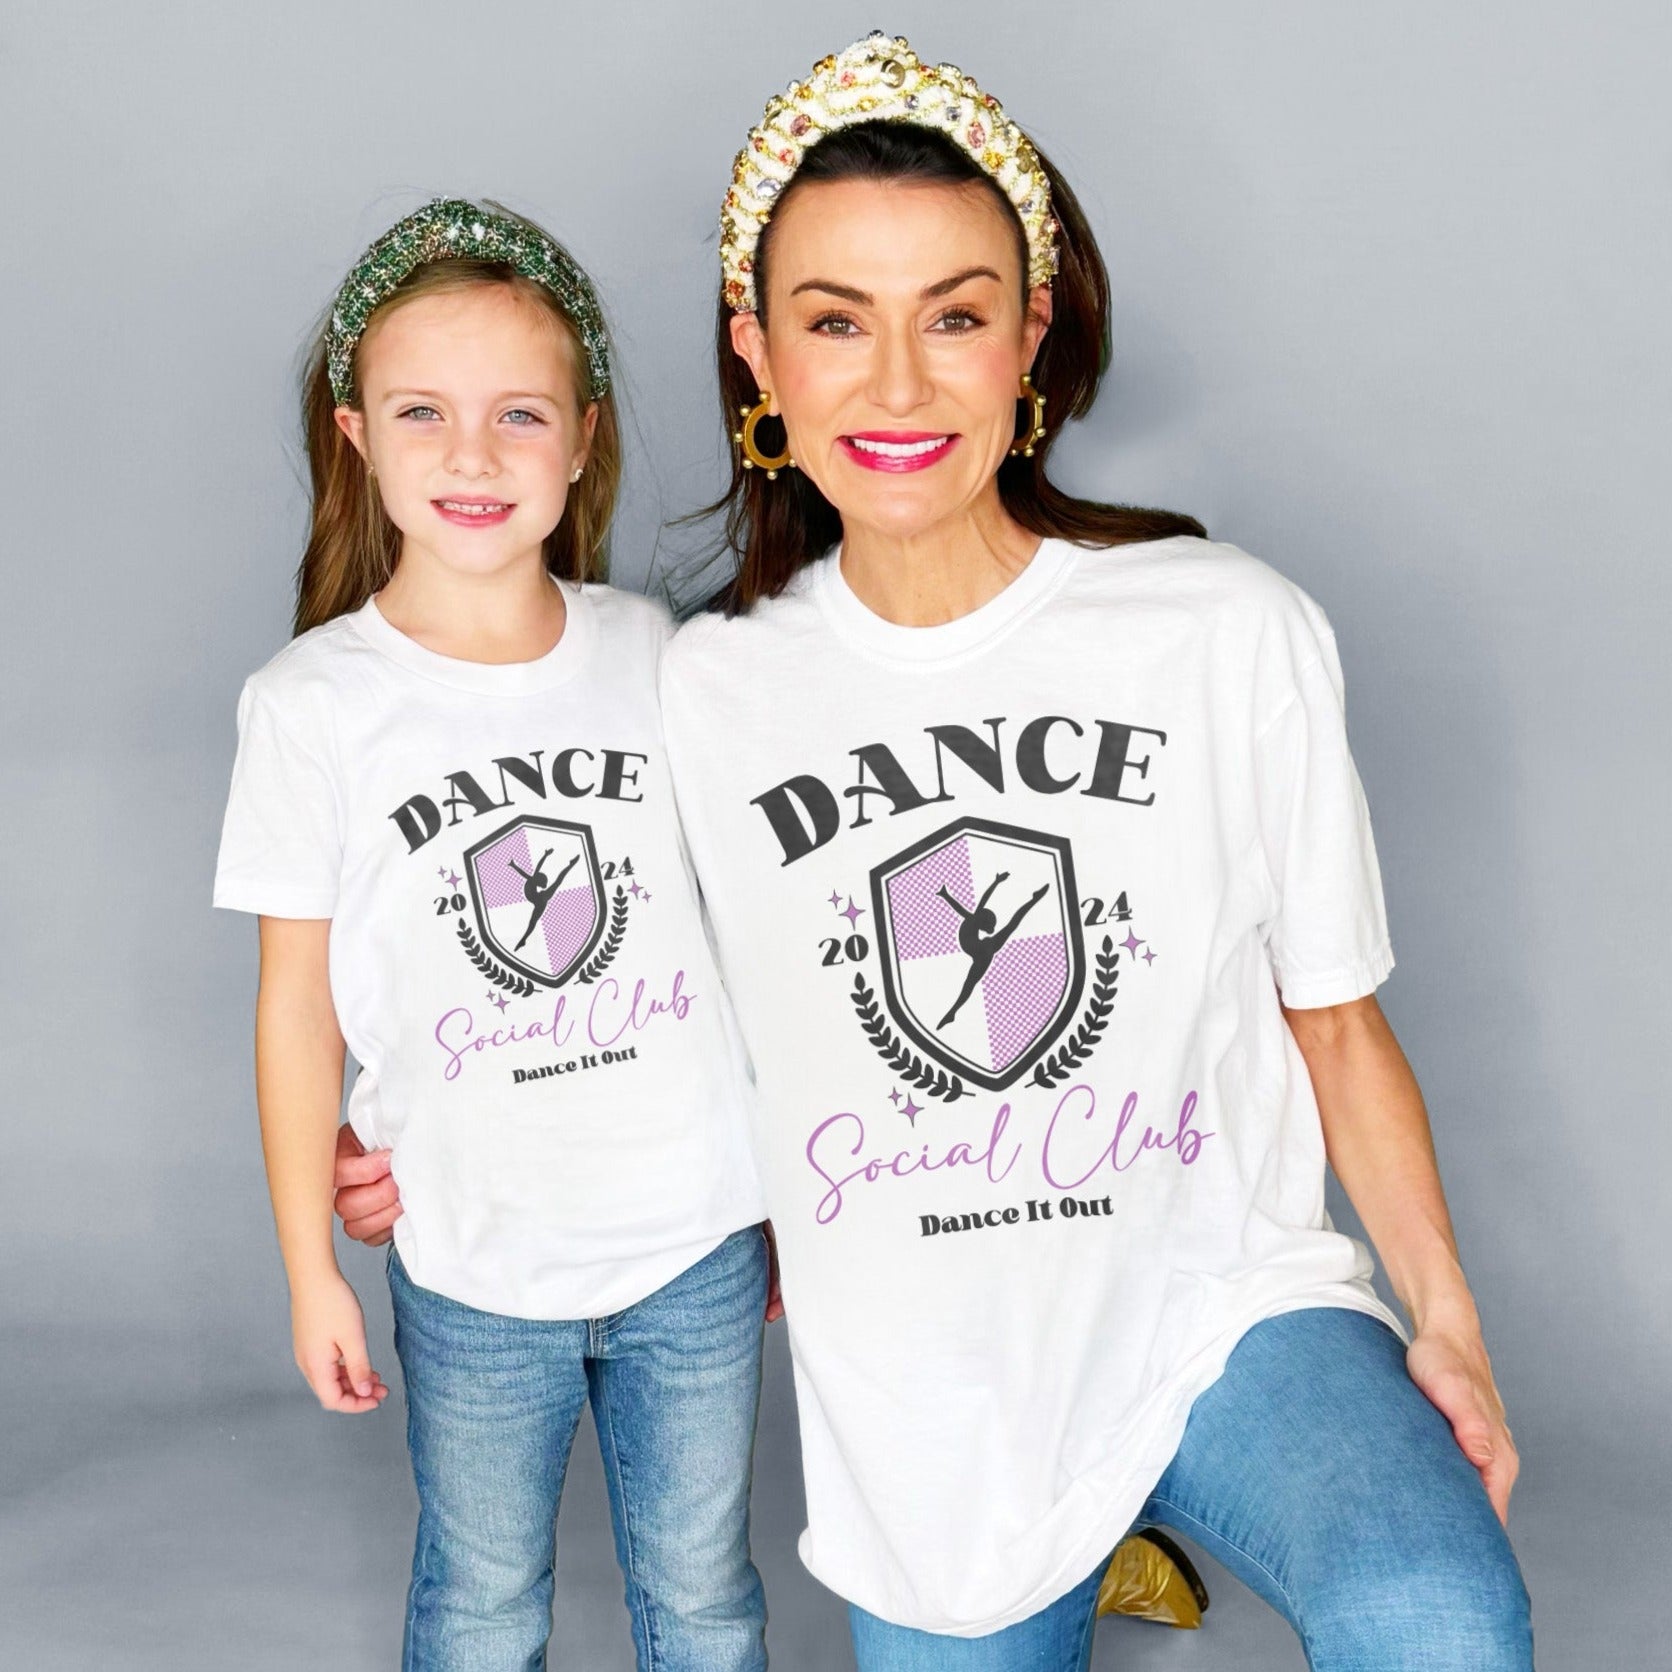 Dance Social Club Youth and Adult Tee